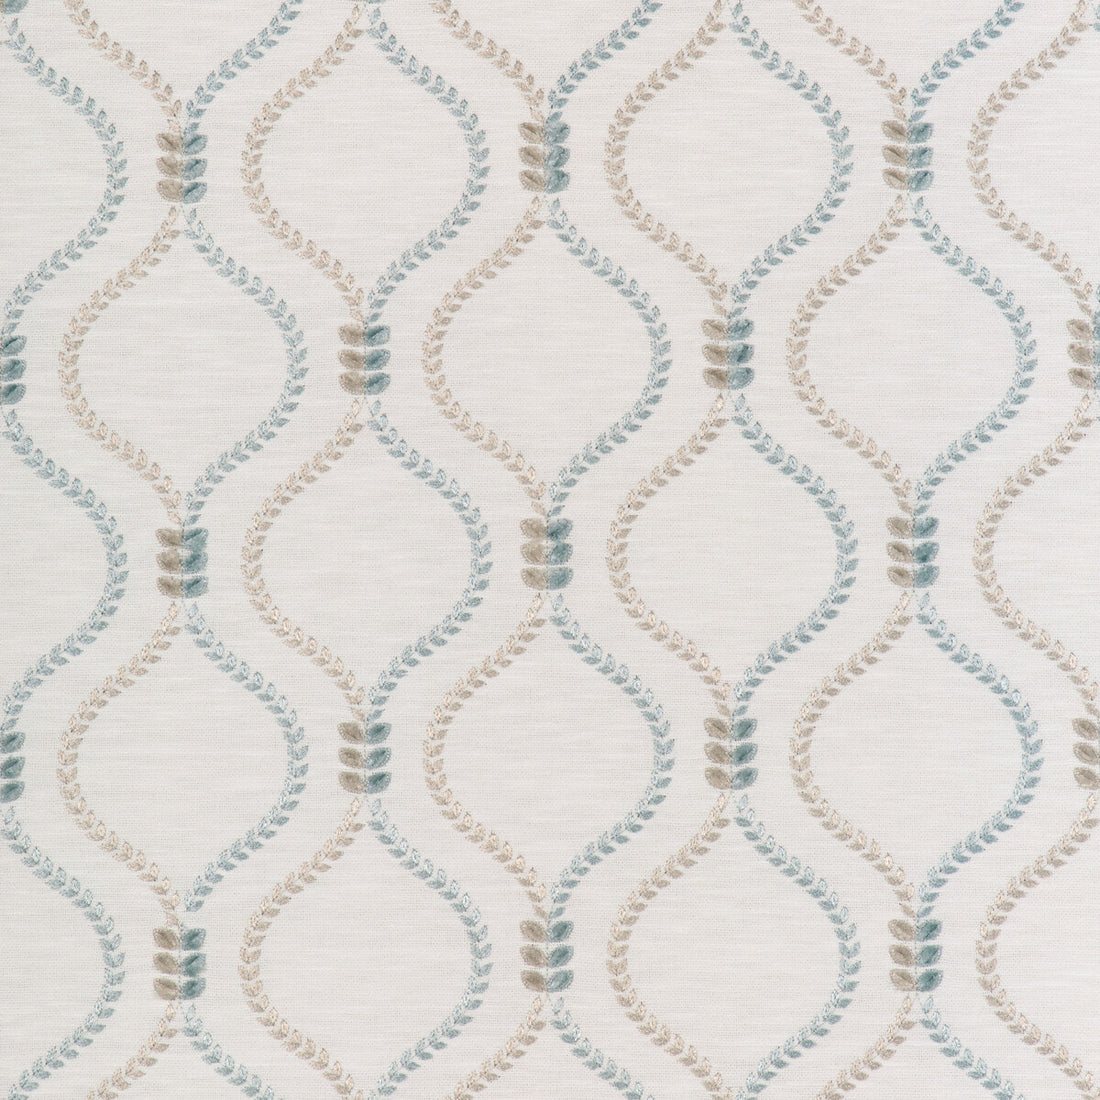 Kravet Basics fabric in 37160-1615 color - pattern 37160.1615.0 - by Kravet Basics in the Modern Embroideries III collection